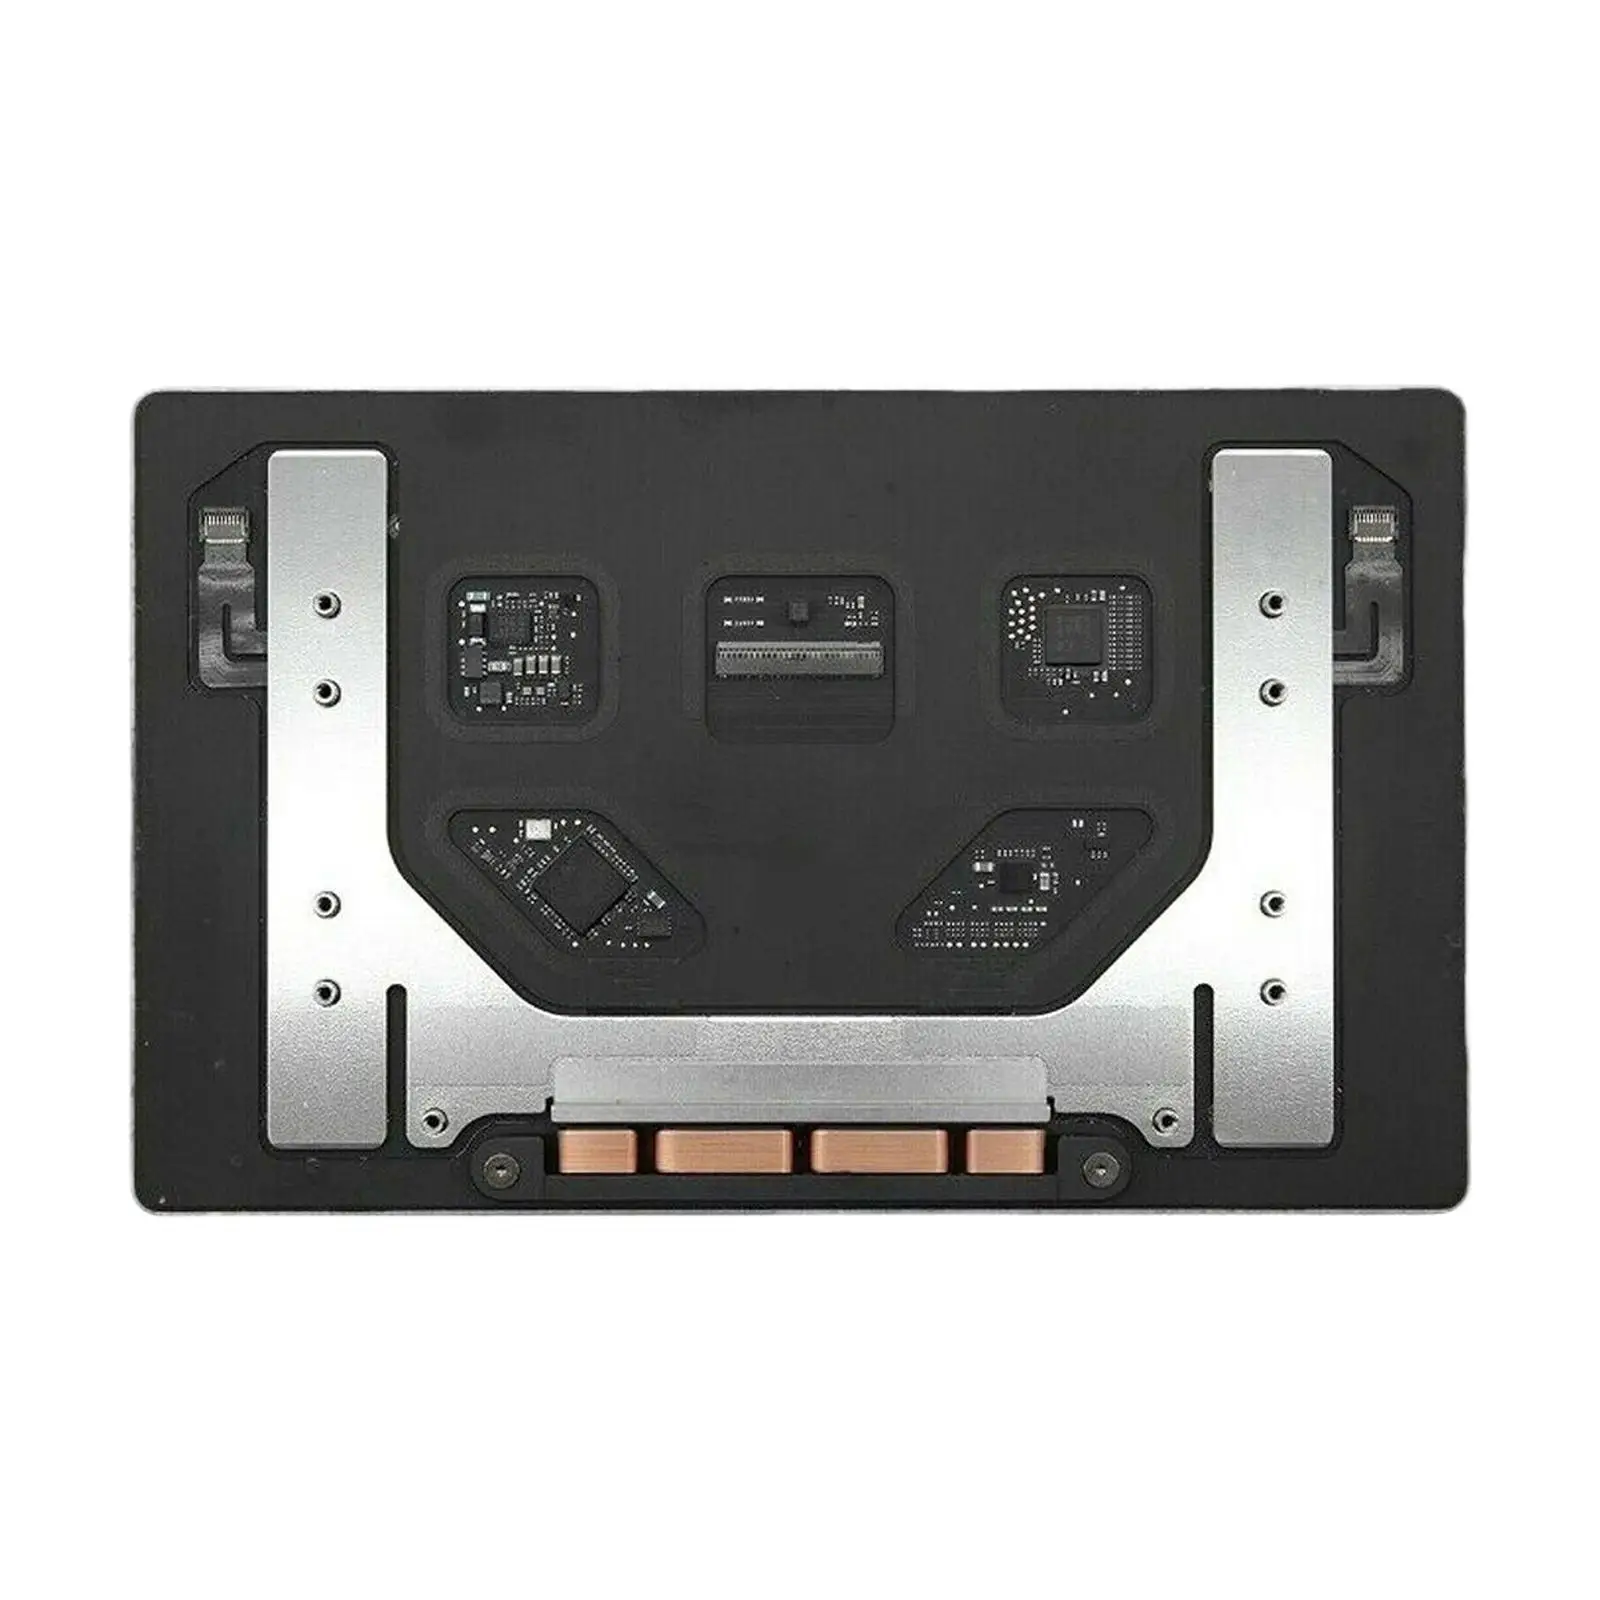 

Touchpad Trackpad Direct Replaces A2338 13.3inch 20 Accessories Premium Laptop High Performance